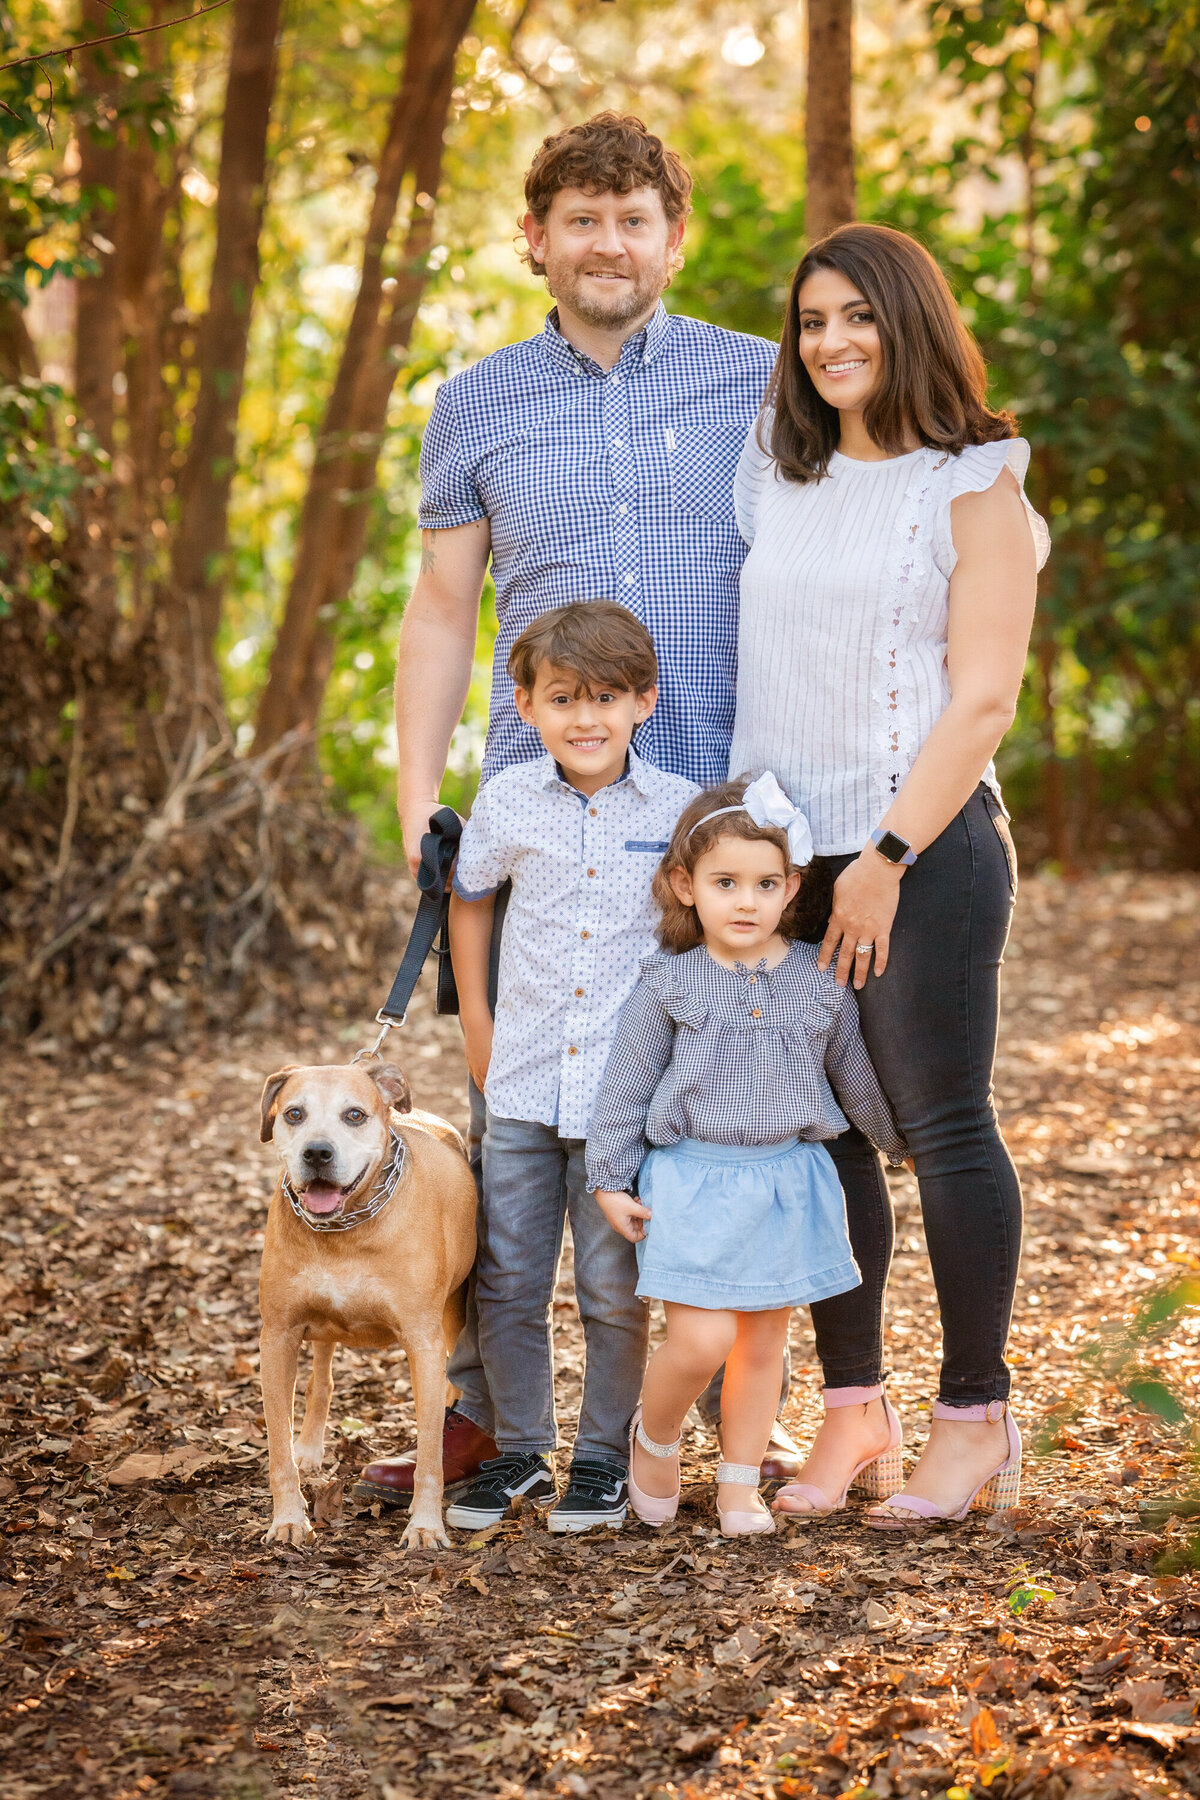 Mom, dad, son, daughter, and dog are standing in the park.  There are brown leaves on the ground and trees behind them.  Mom is wearing a white blouse and black jeans.  Dad is wearing blue.  The kids are wearing jeans and a skirt.  The dog is tan colored and on a leash.  They are all looking at the camera.